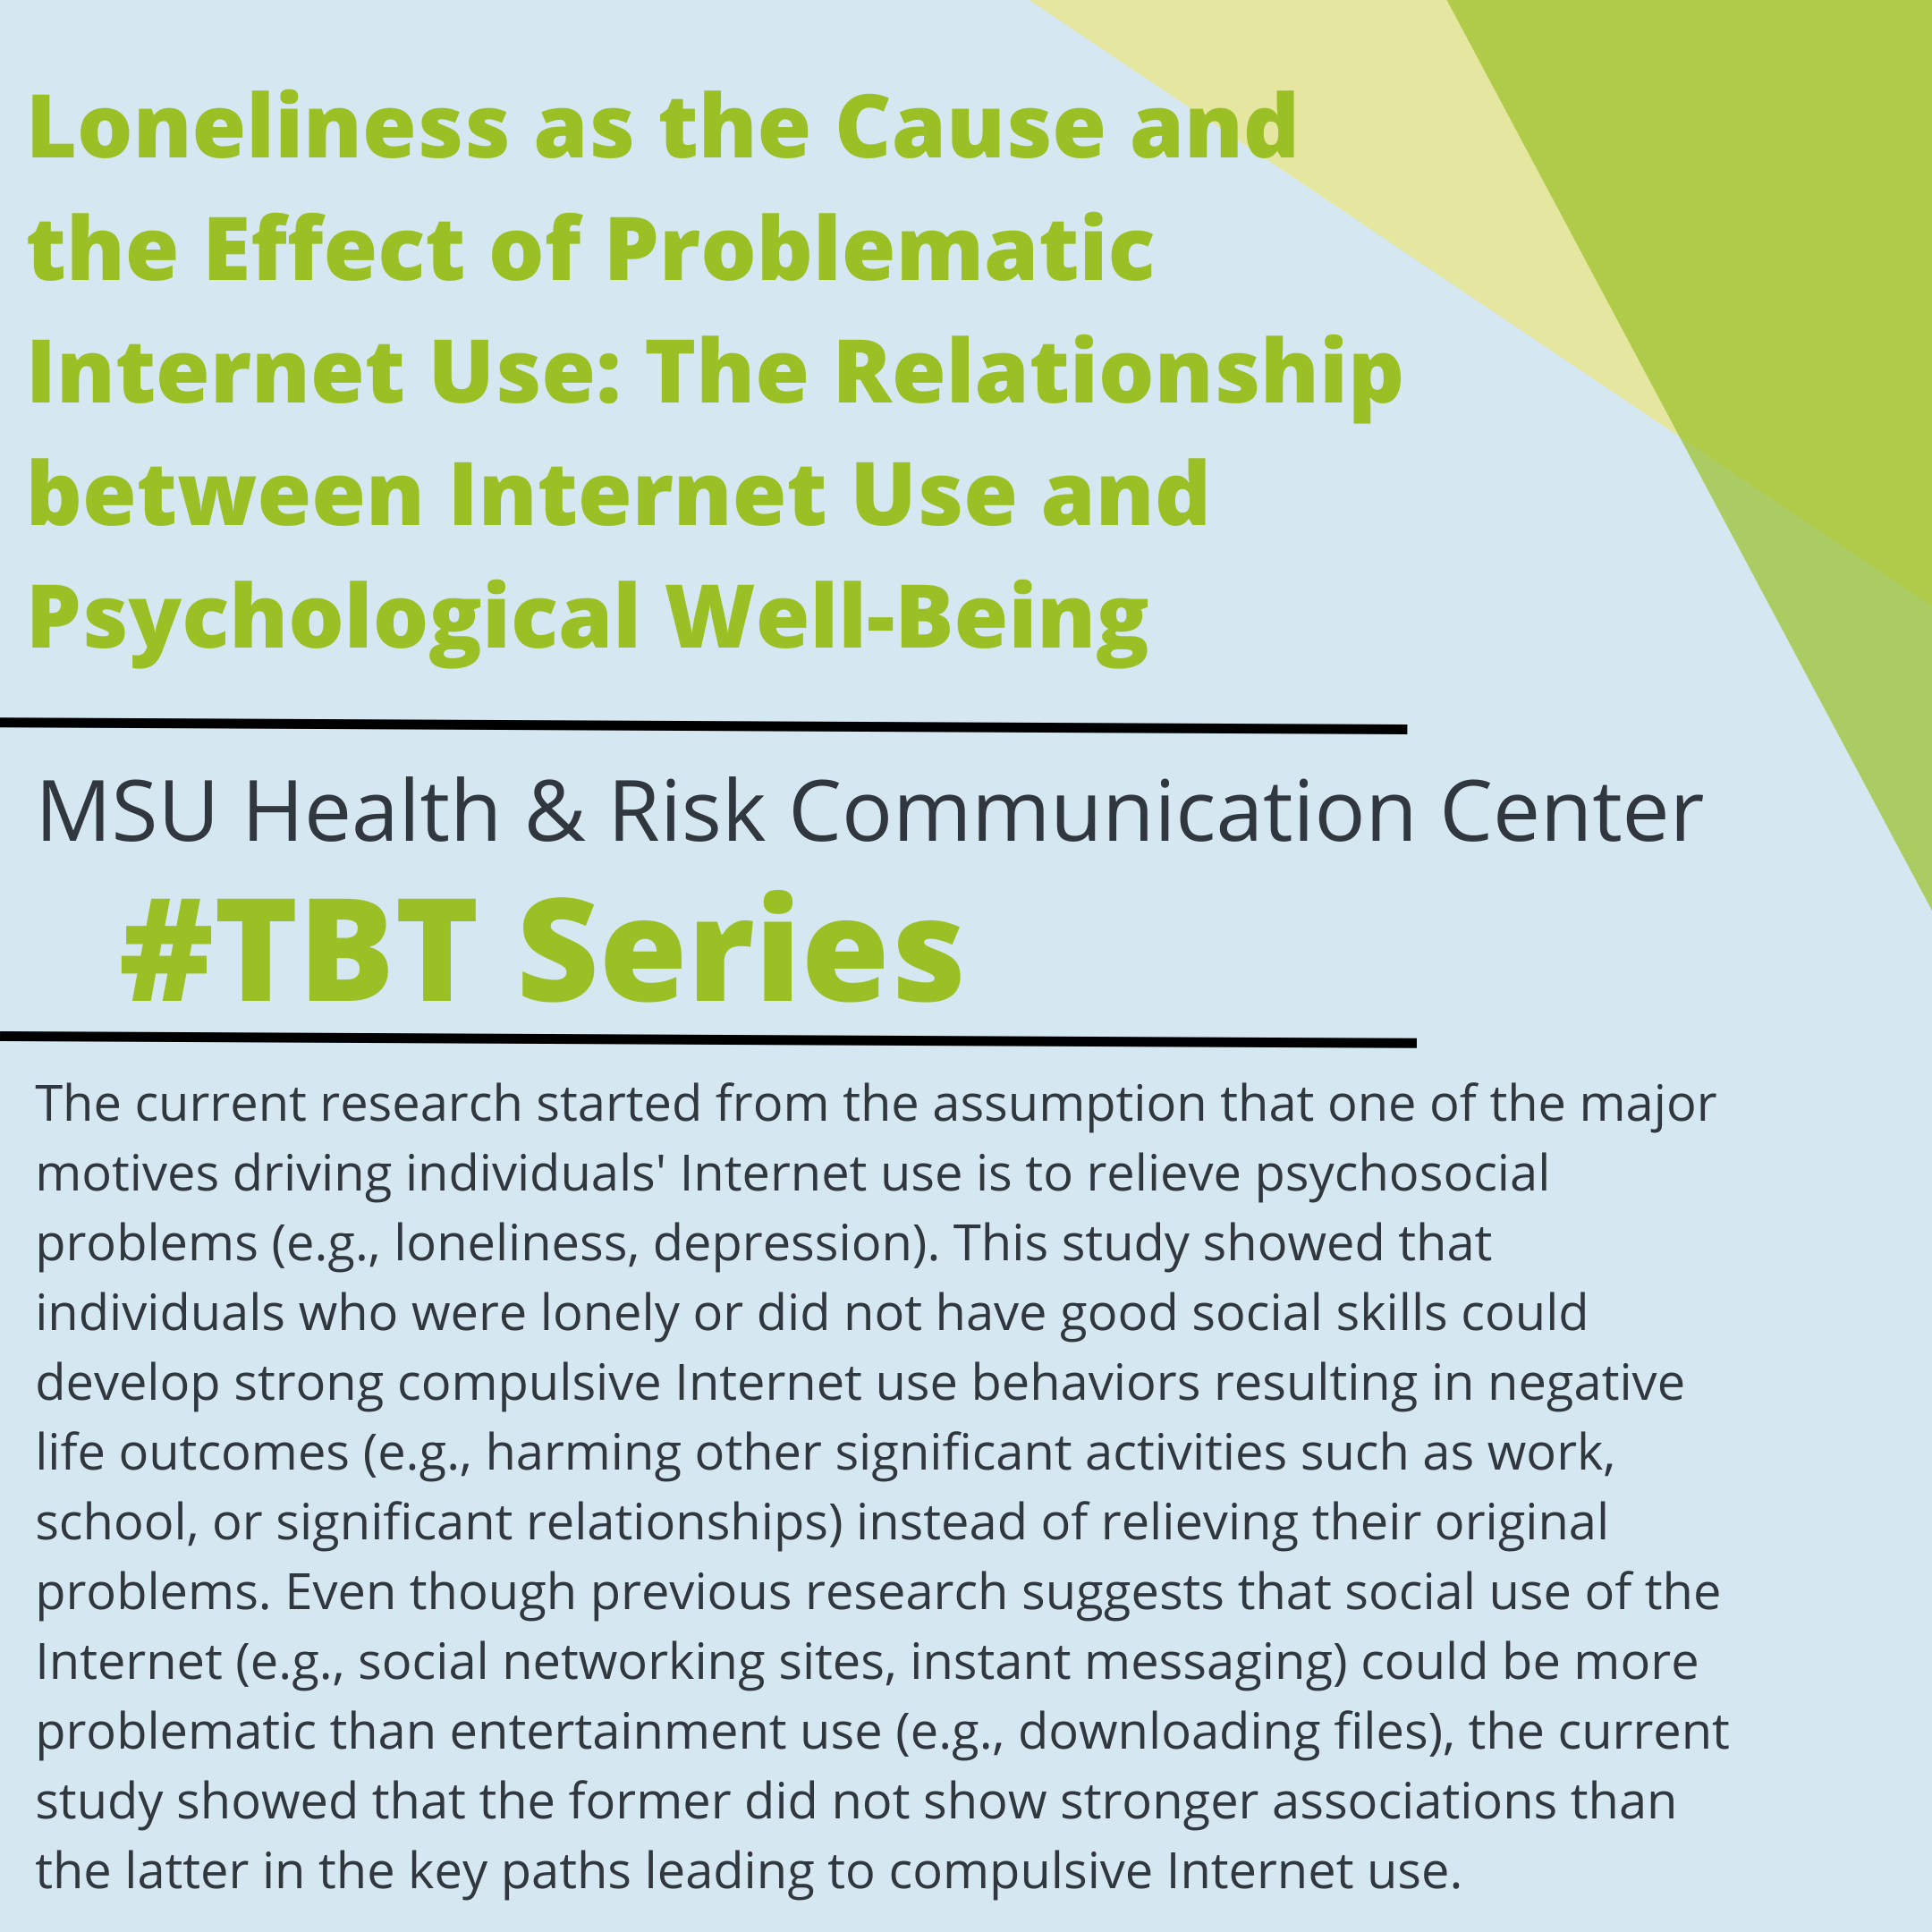 Loneliness as the Cause and the Effect of Problematic Internet Use: The Relationship between Internet Use and Psychological Well-Being